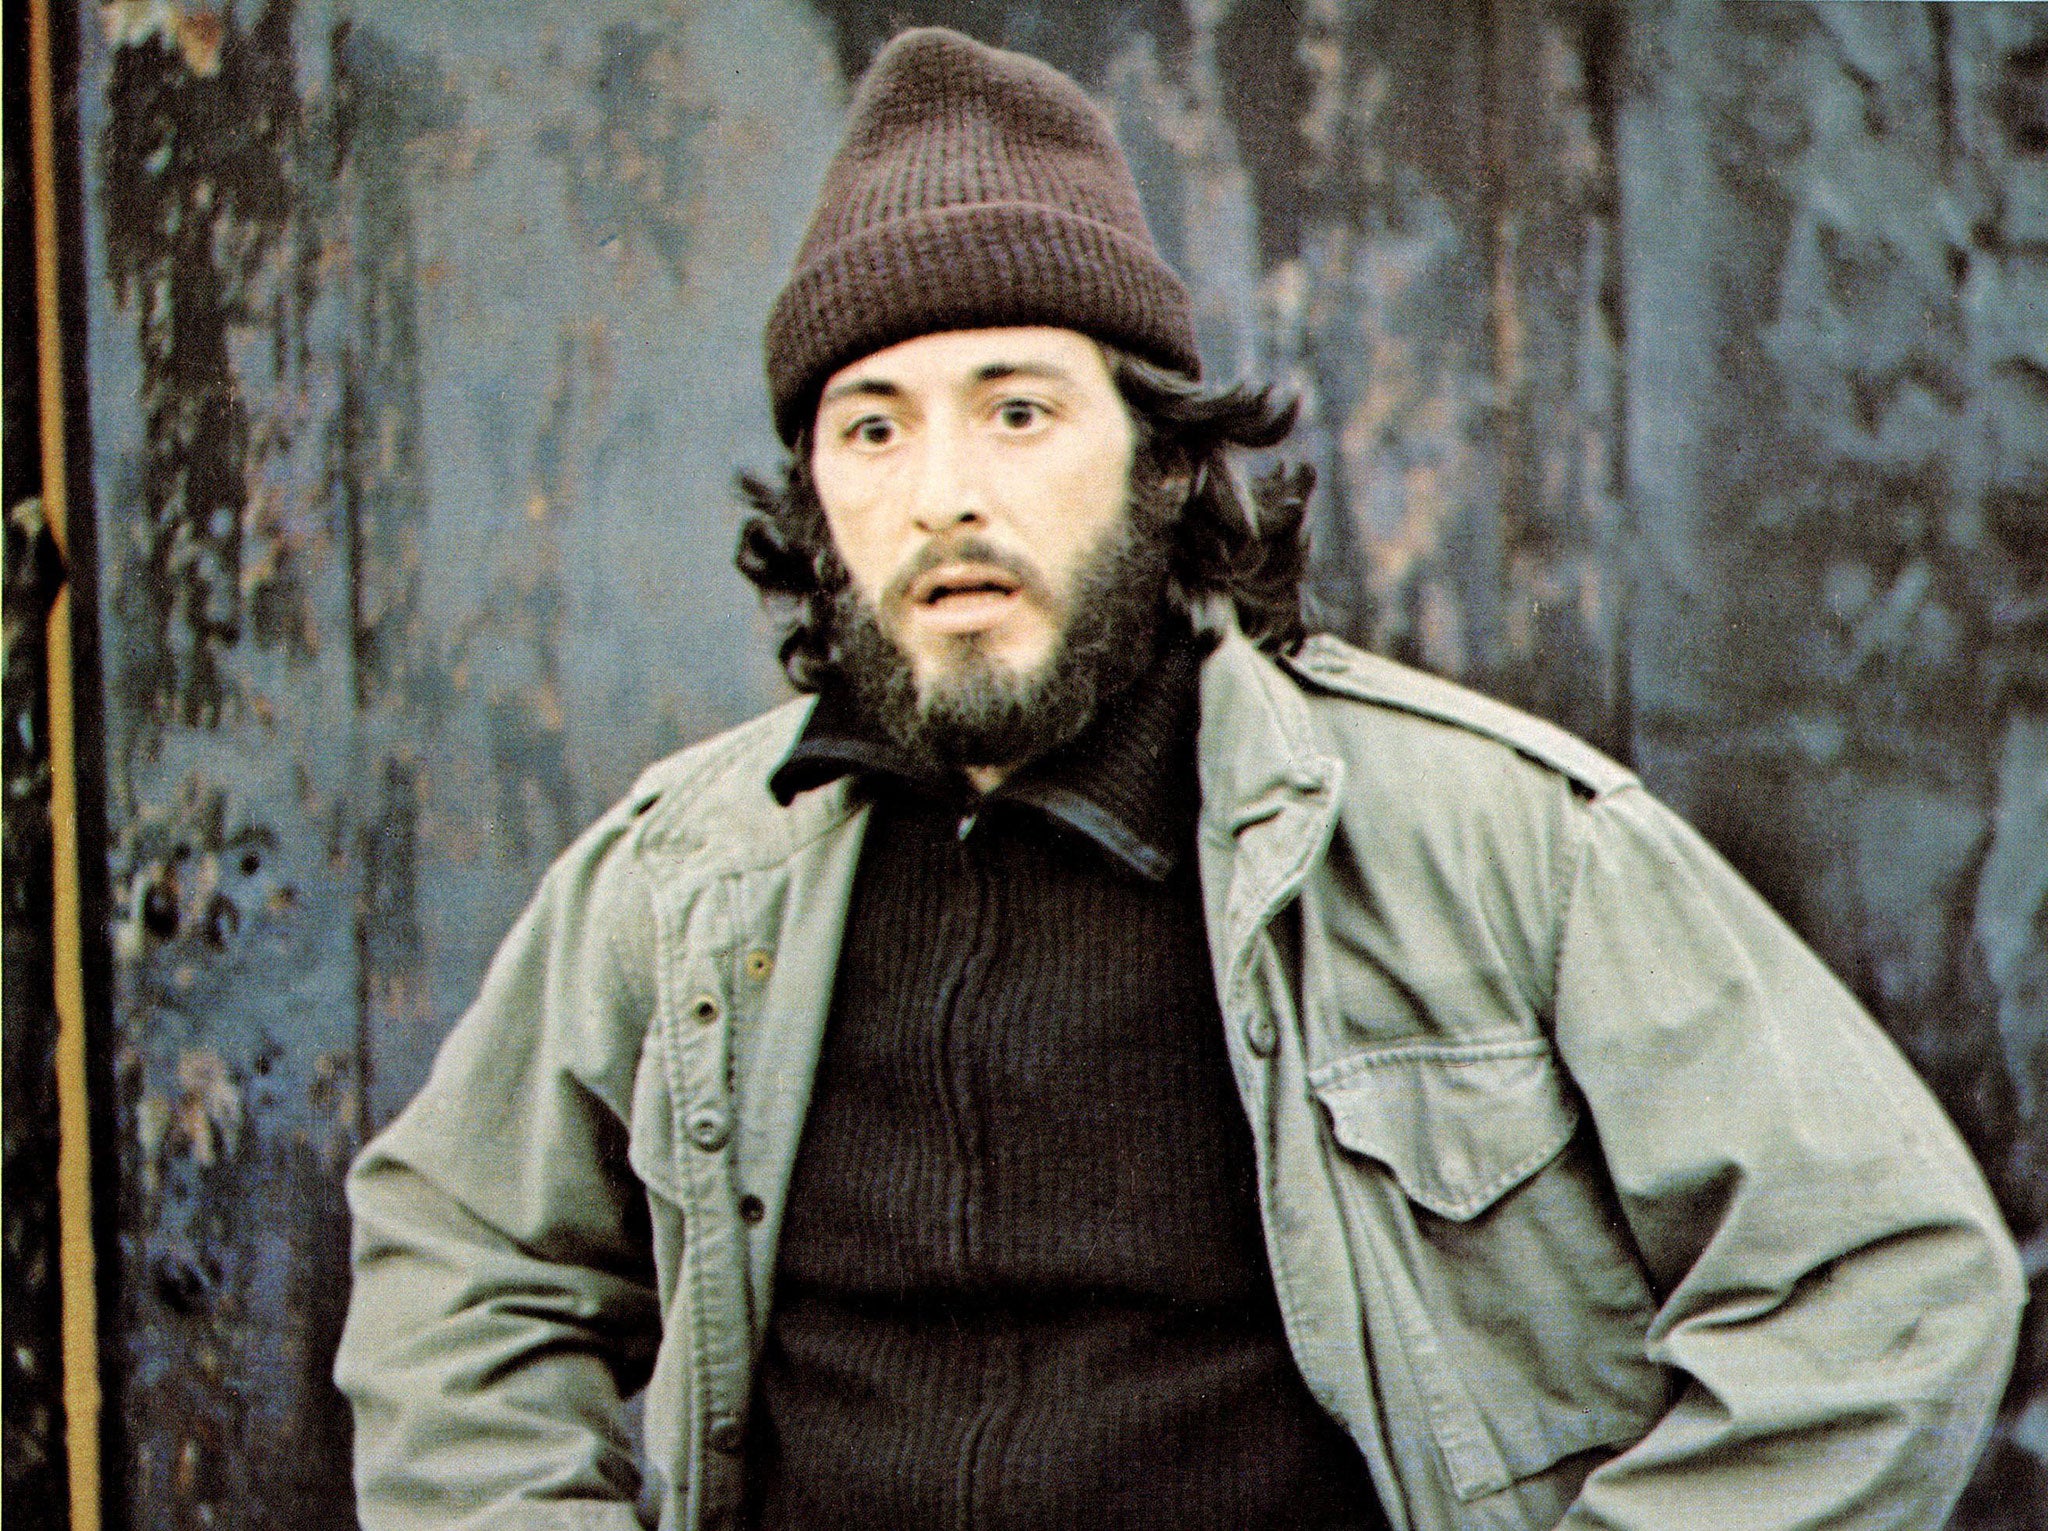 Serpico, 1973 Known for playing characters on both sides of the law, Pacino's next big role was real-life police whistle-blower, Frank Serpico